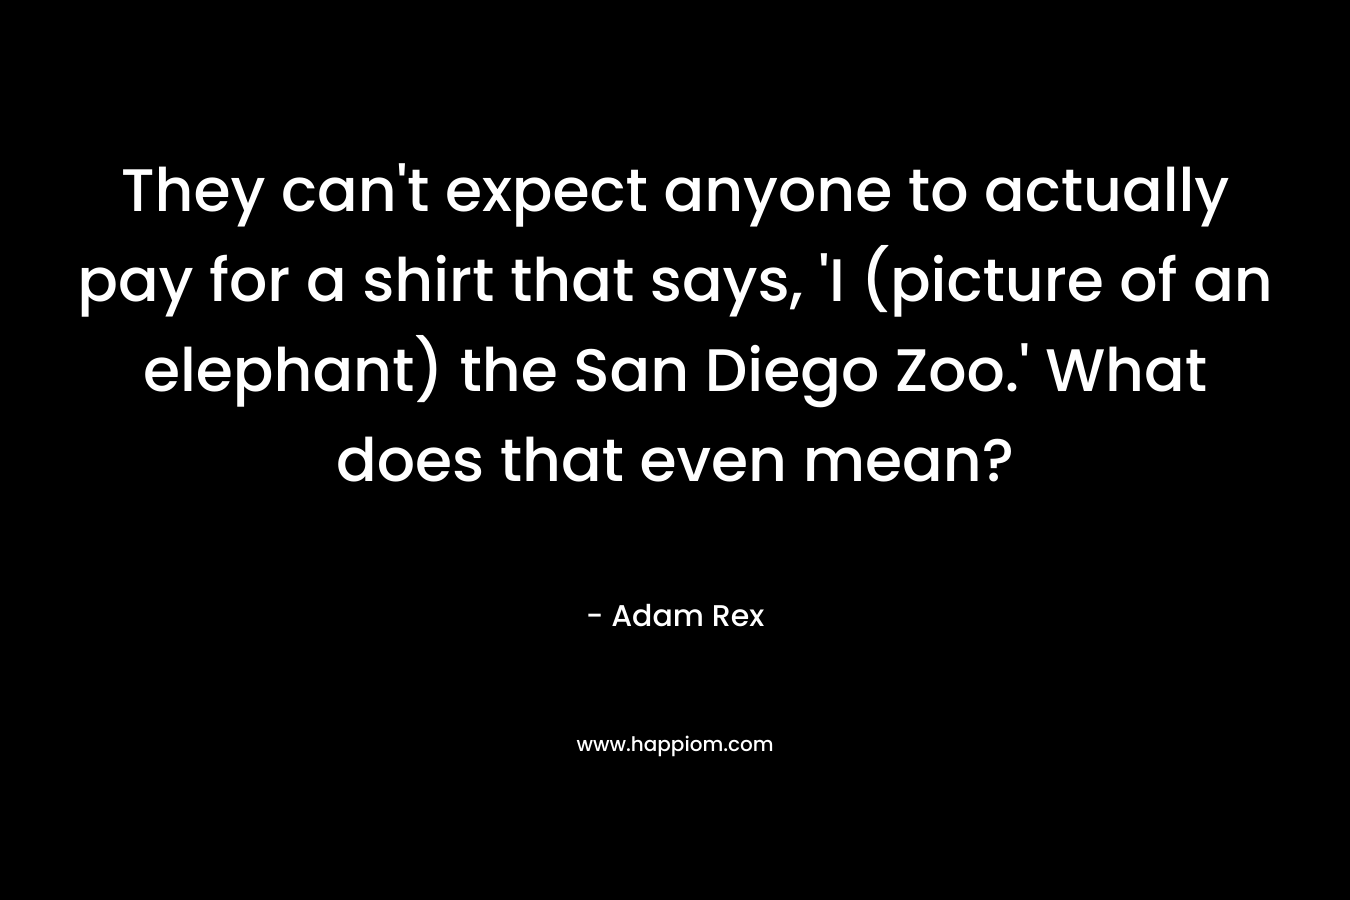 They can’t expect anyone to actually pay for a shirt that says, ‘I (picture of an elephant) the San Diego Zoo.’ What does that even mean? – Adam Rex